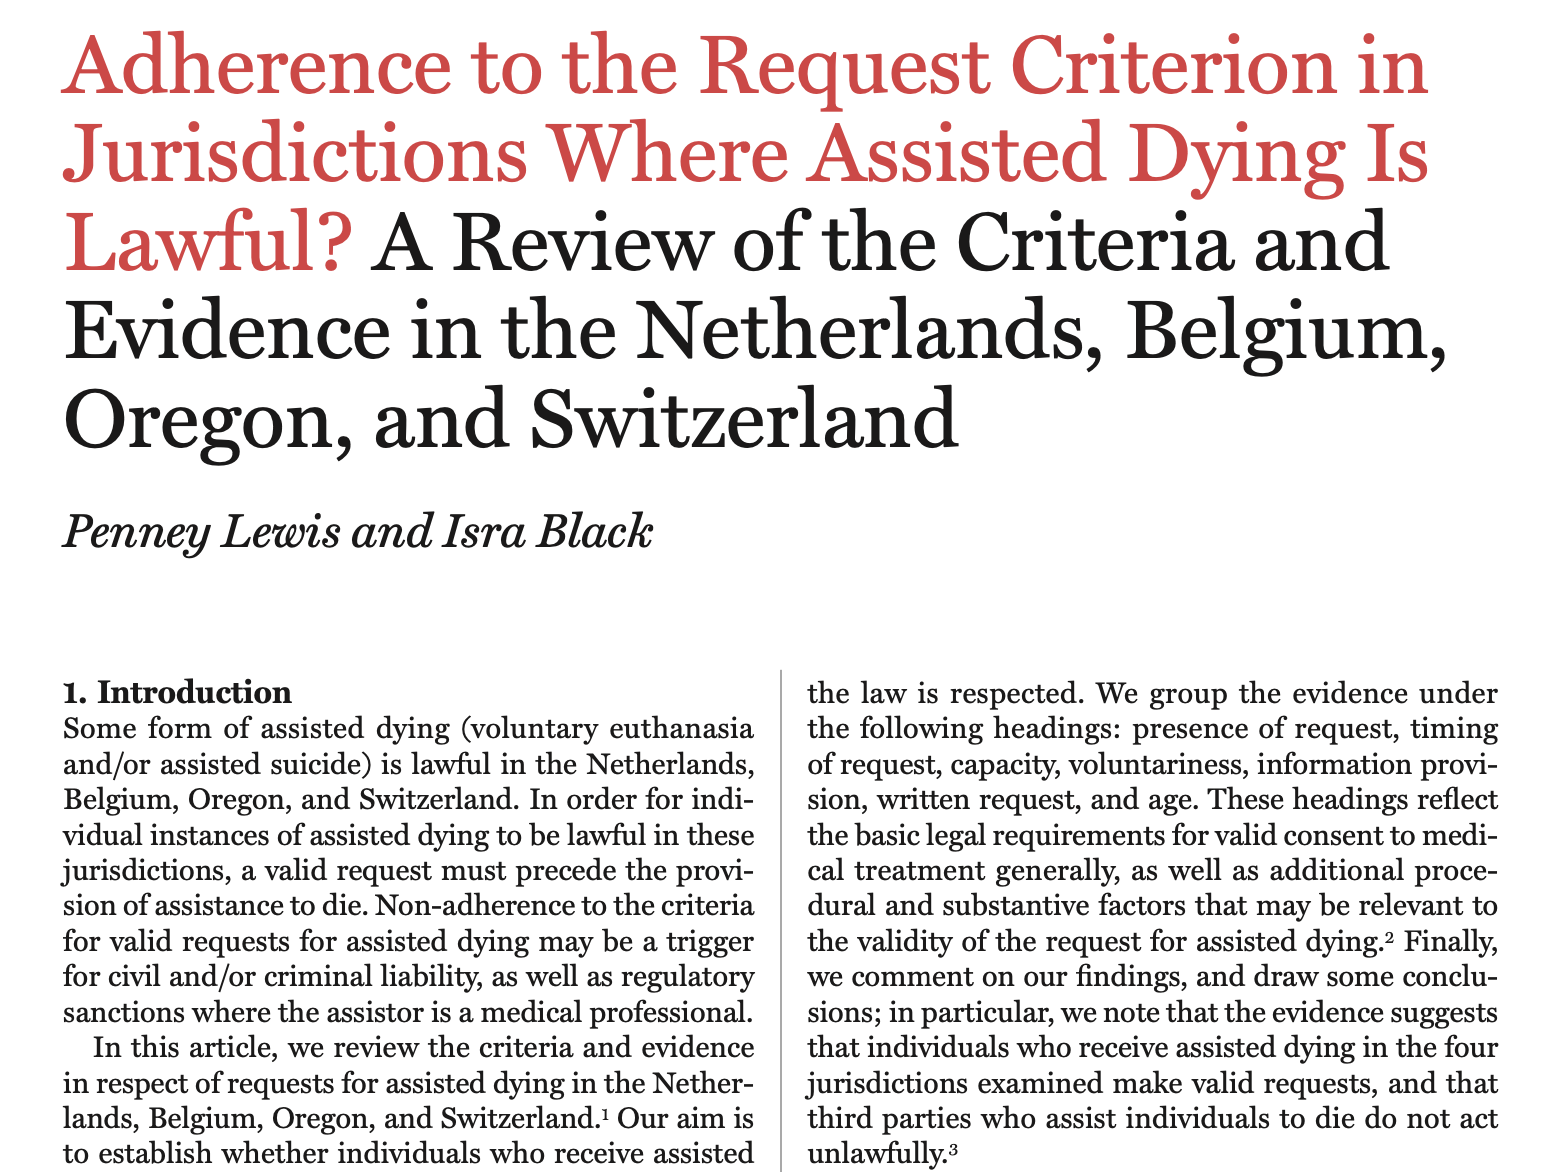 adherence to the request criterion in jurisdictions where assisted dying is lawful? A review of the criteria and evidence in the Netherlands, Belgium, Oregon, and Switzerland